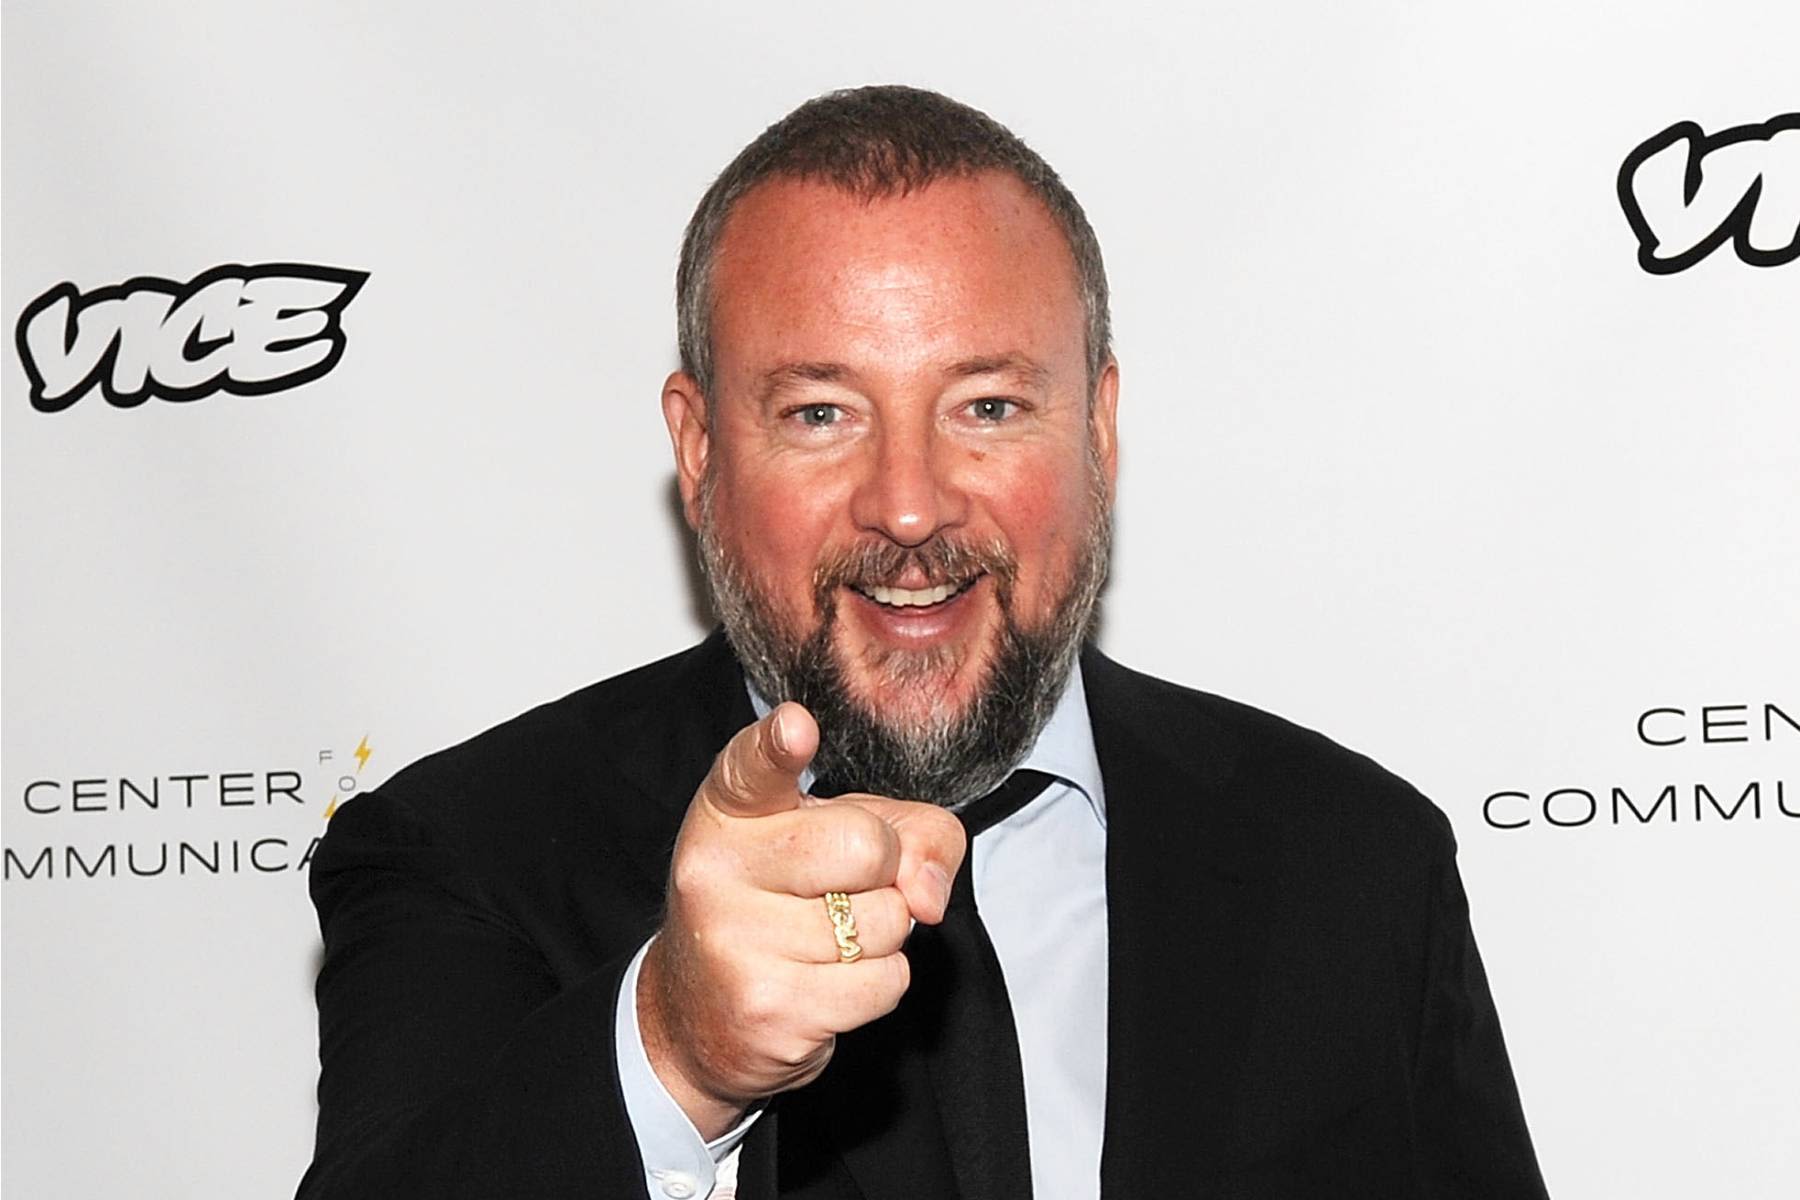 Shane Smith Returns to Vice After Company Bankruptcy, Sets Podcast With Bill Maher